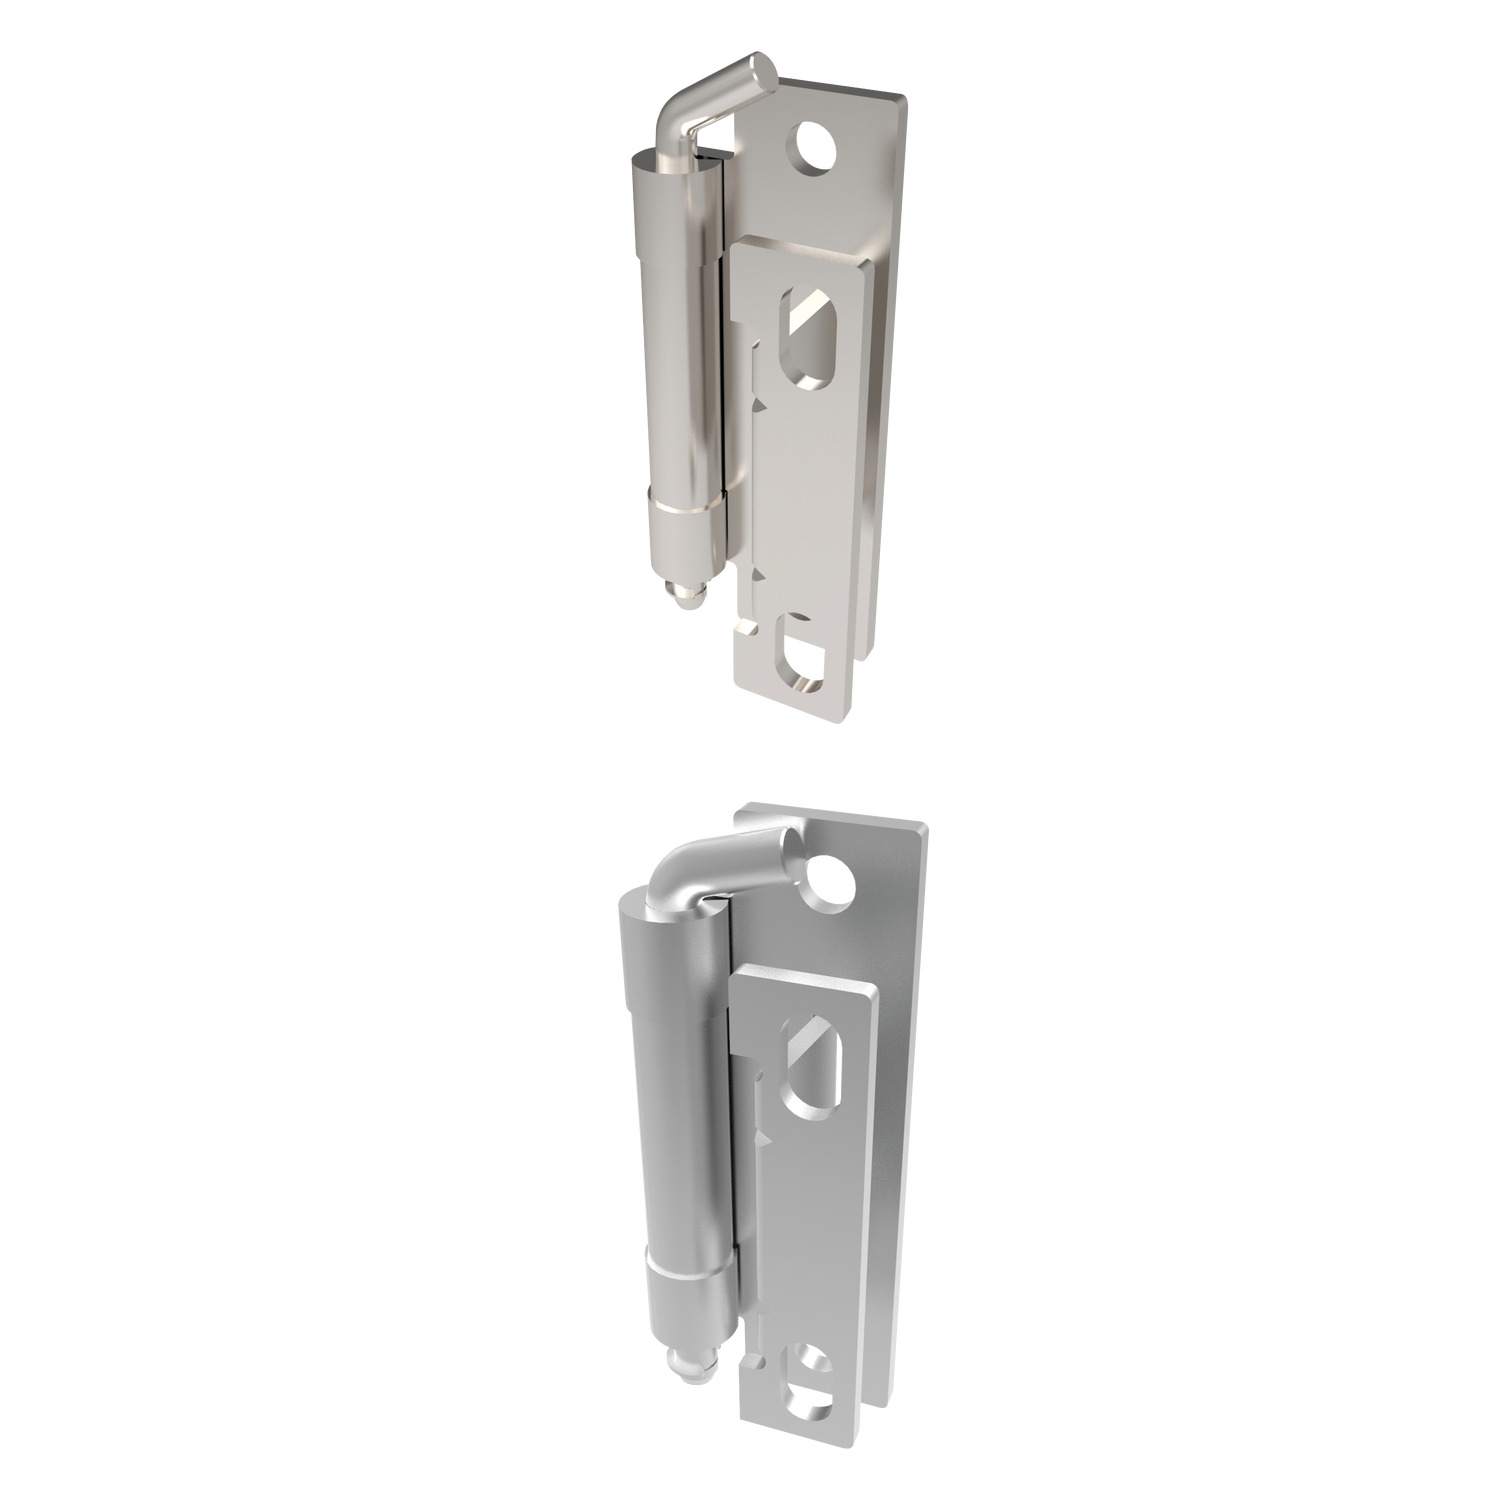 S2125 Concealed Pivot Hinges - Lift Off